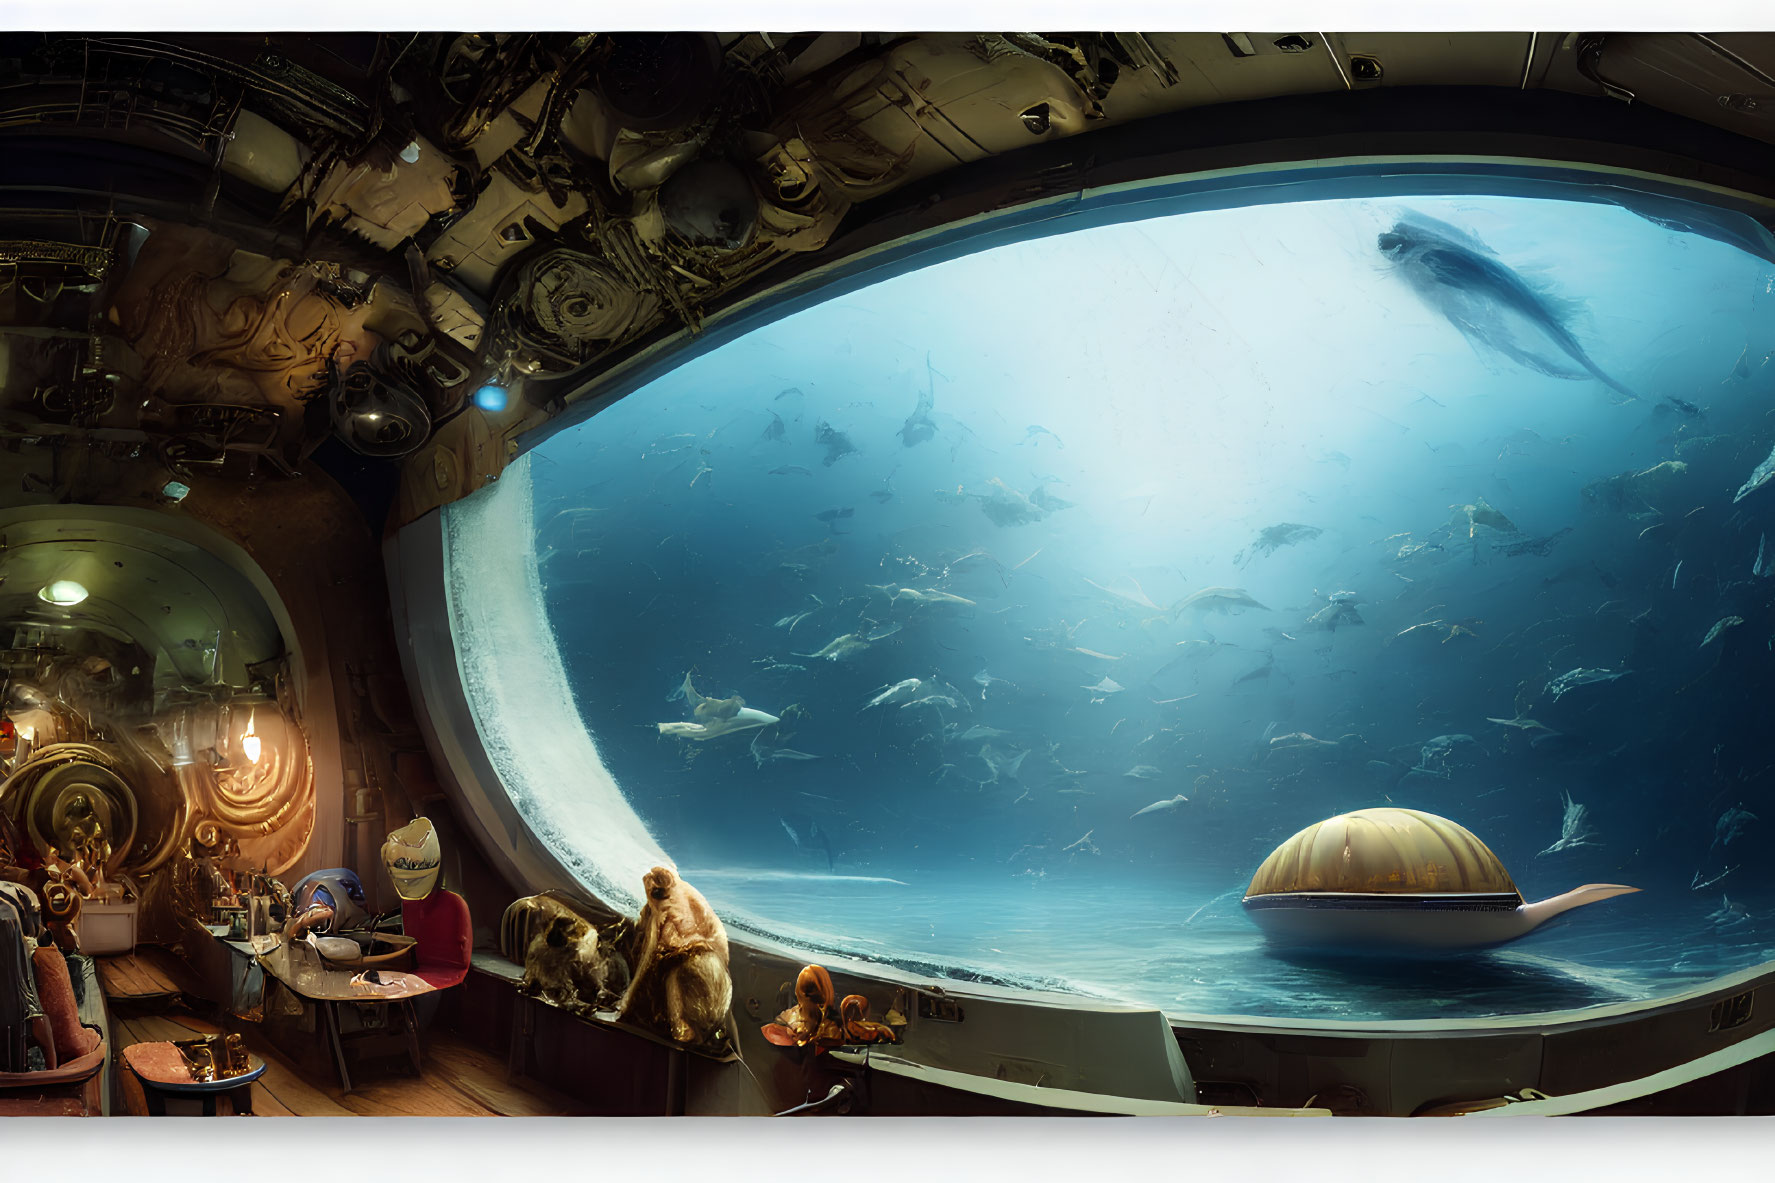 Ornate submarine interior with bear in spacesuit and fish outside porthole